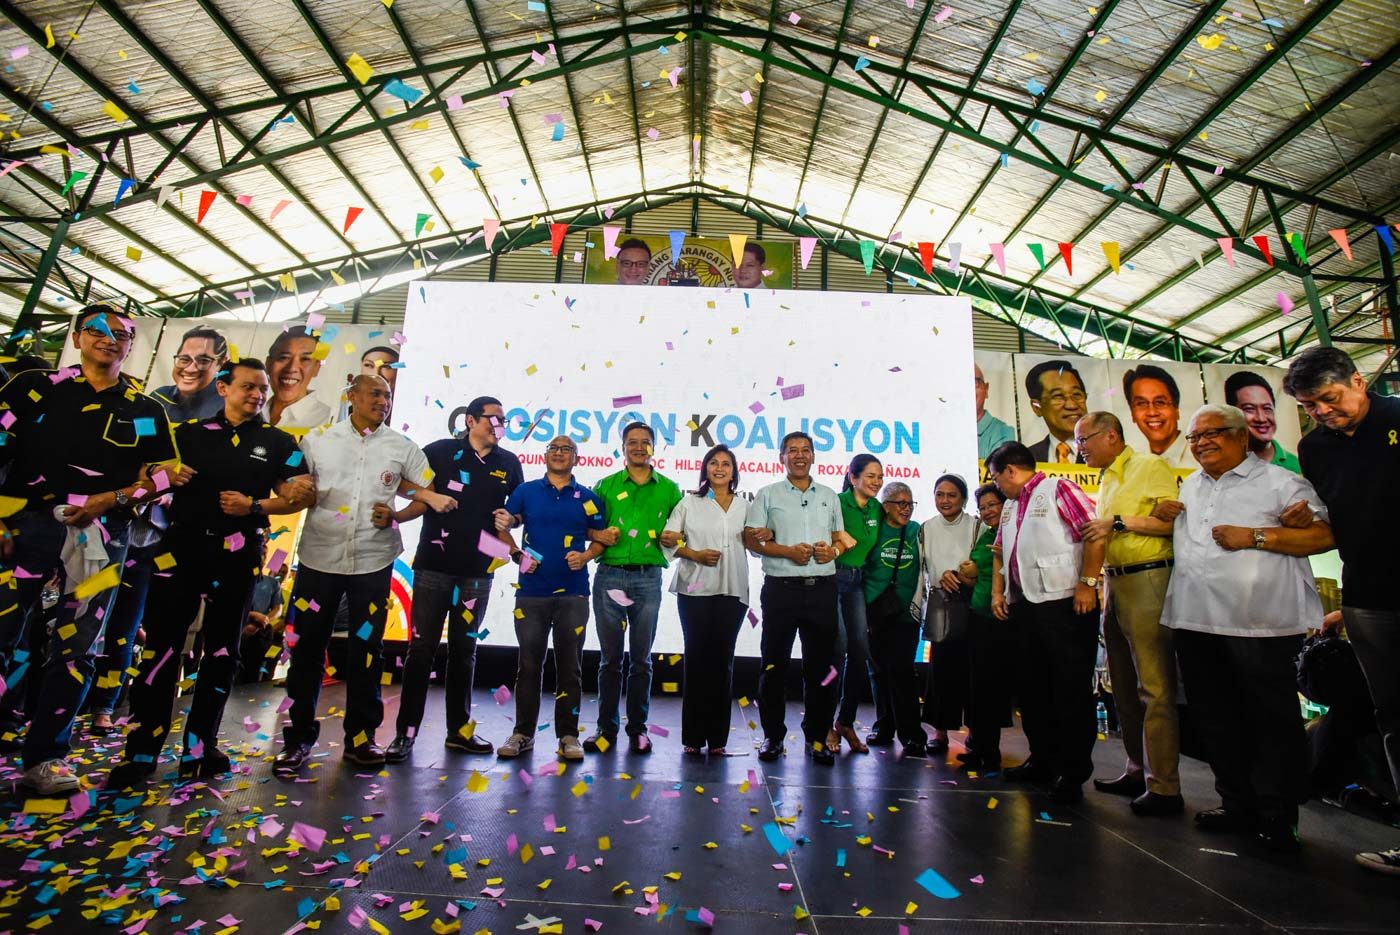 Robredo urges voters: 2019 polls chance to ‘make things right’